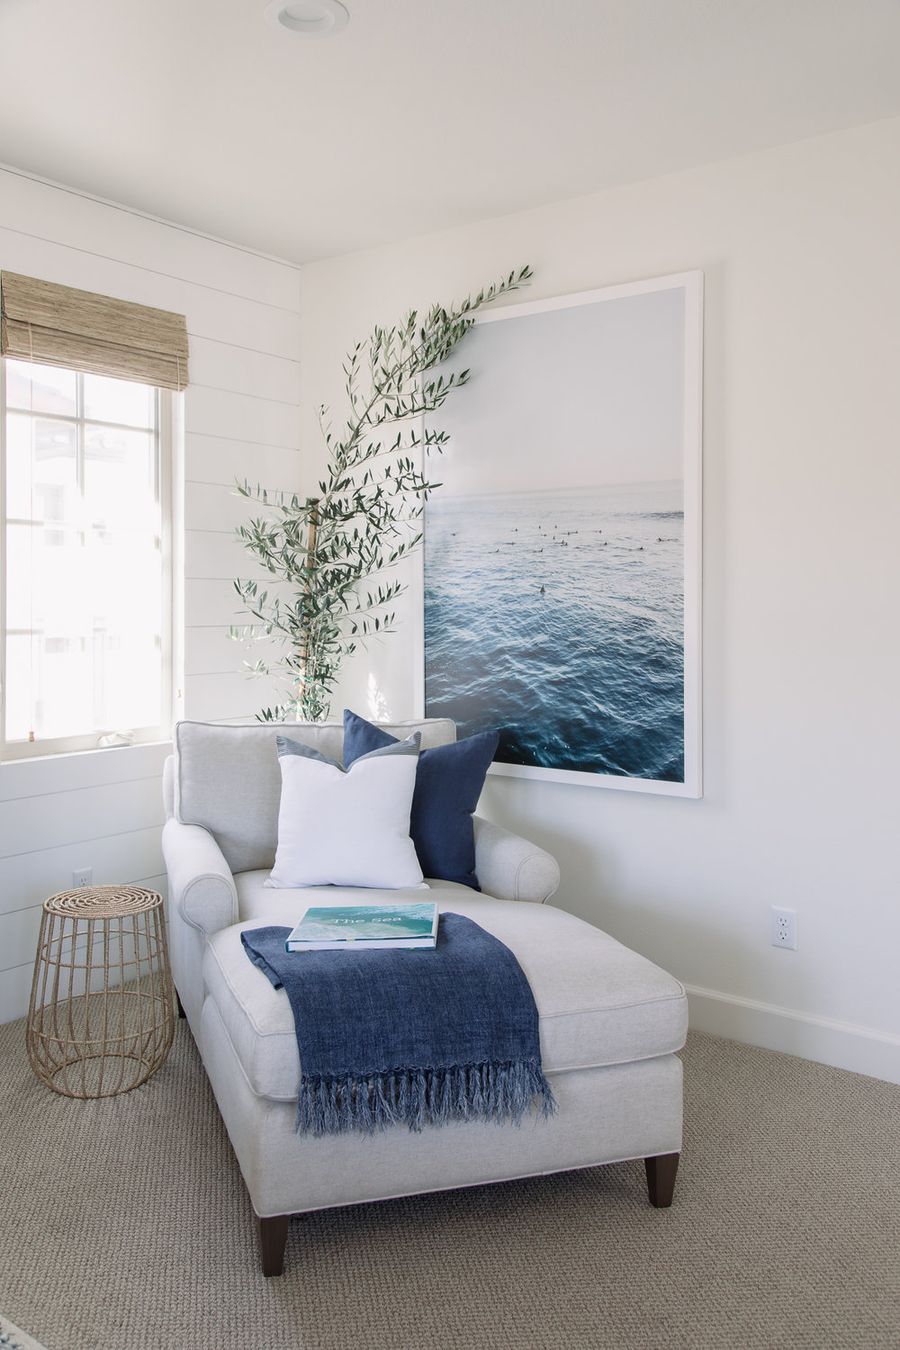 Chaise Lounge and Large Waves Photograph in Coastal Reading Nook via Pure Salt Interiors